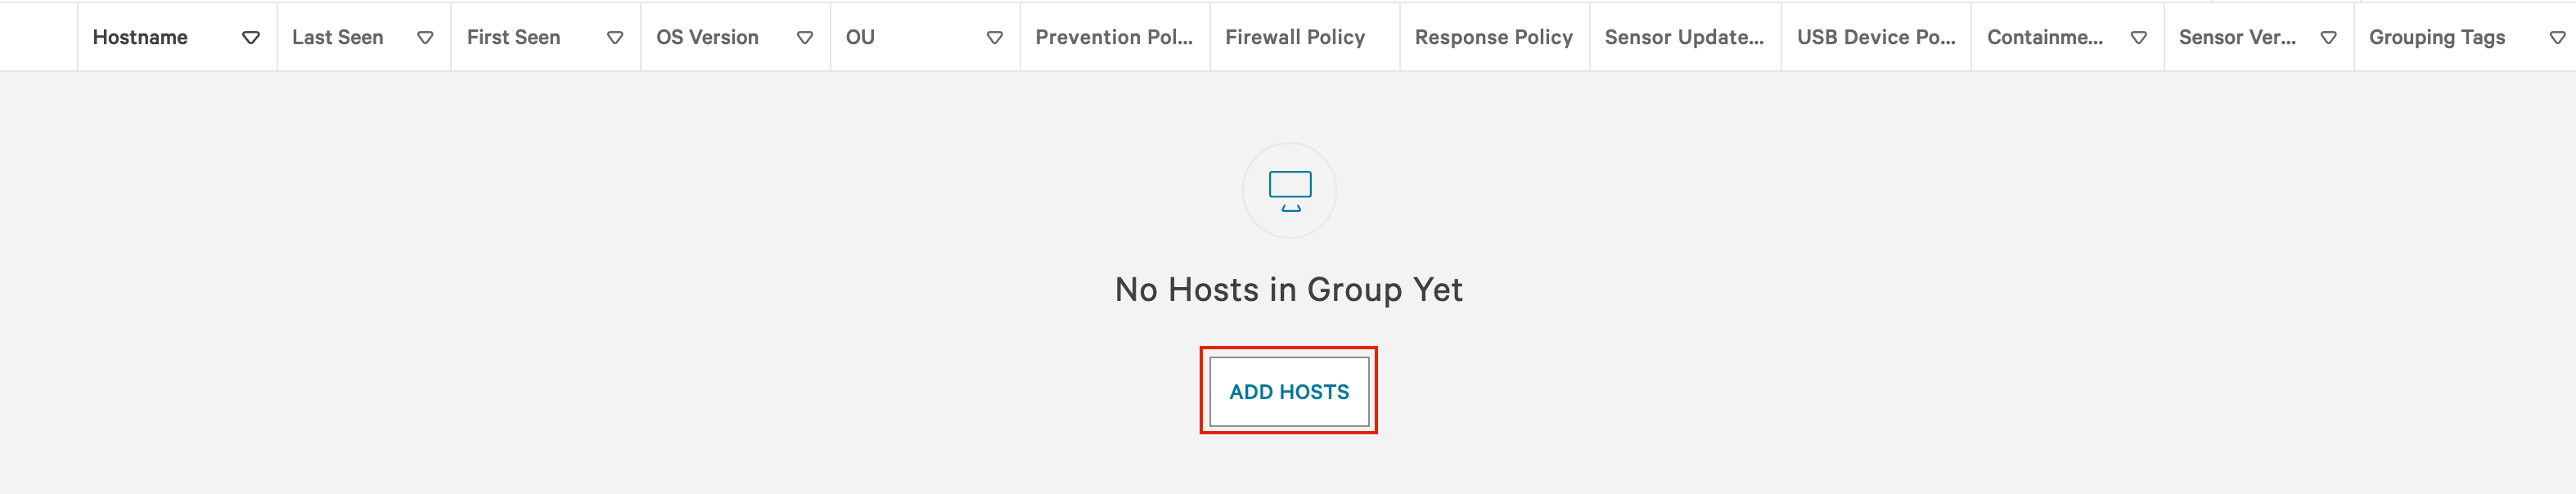 Static Host Group add hosts - 12-21